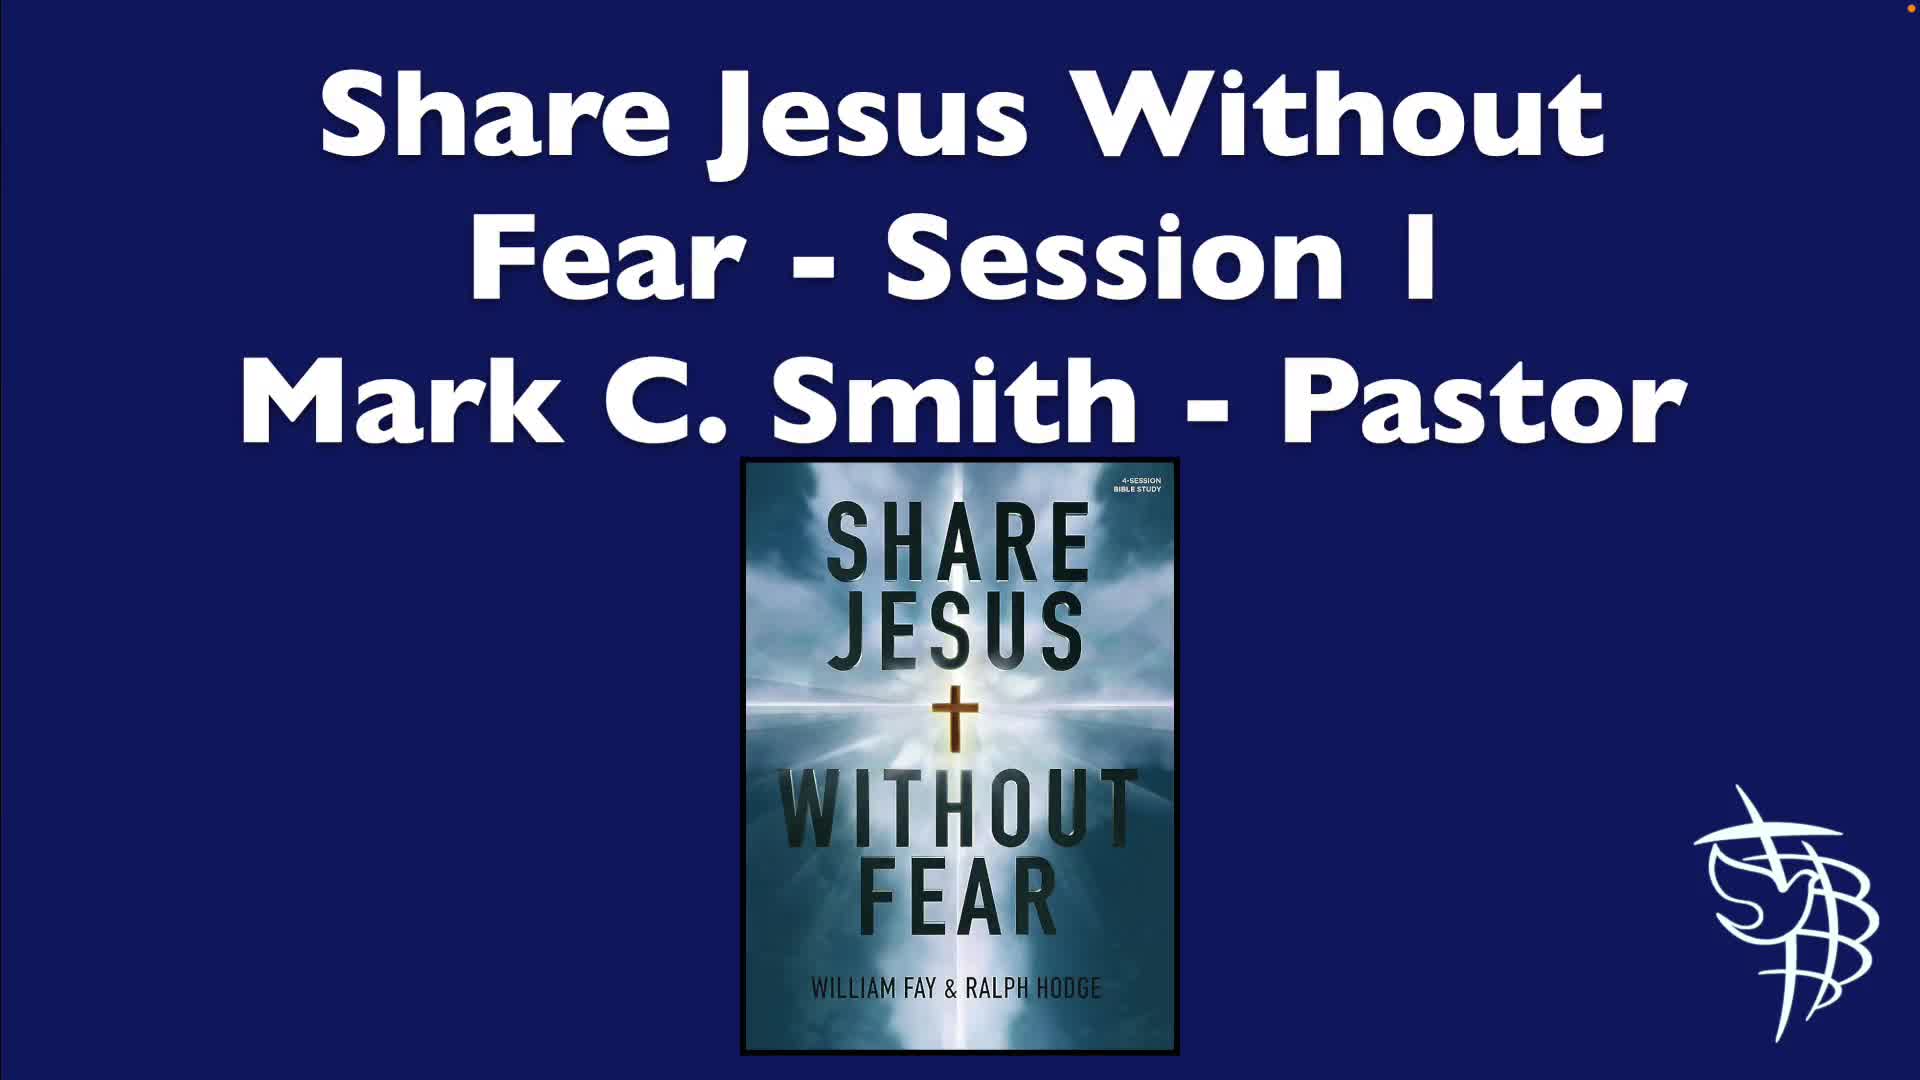 Share Jesus Without Fear - Session 1